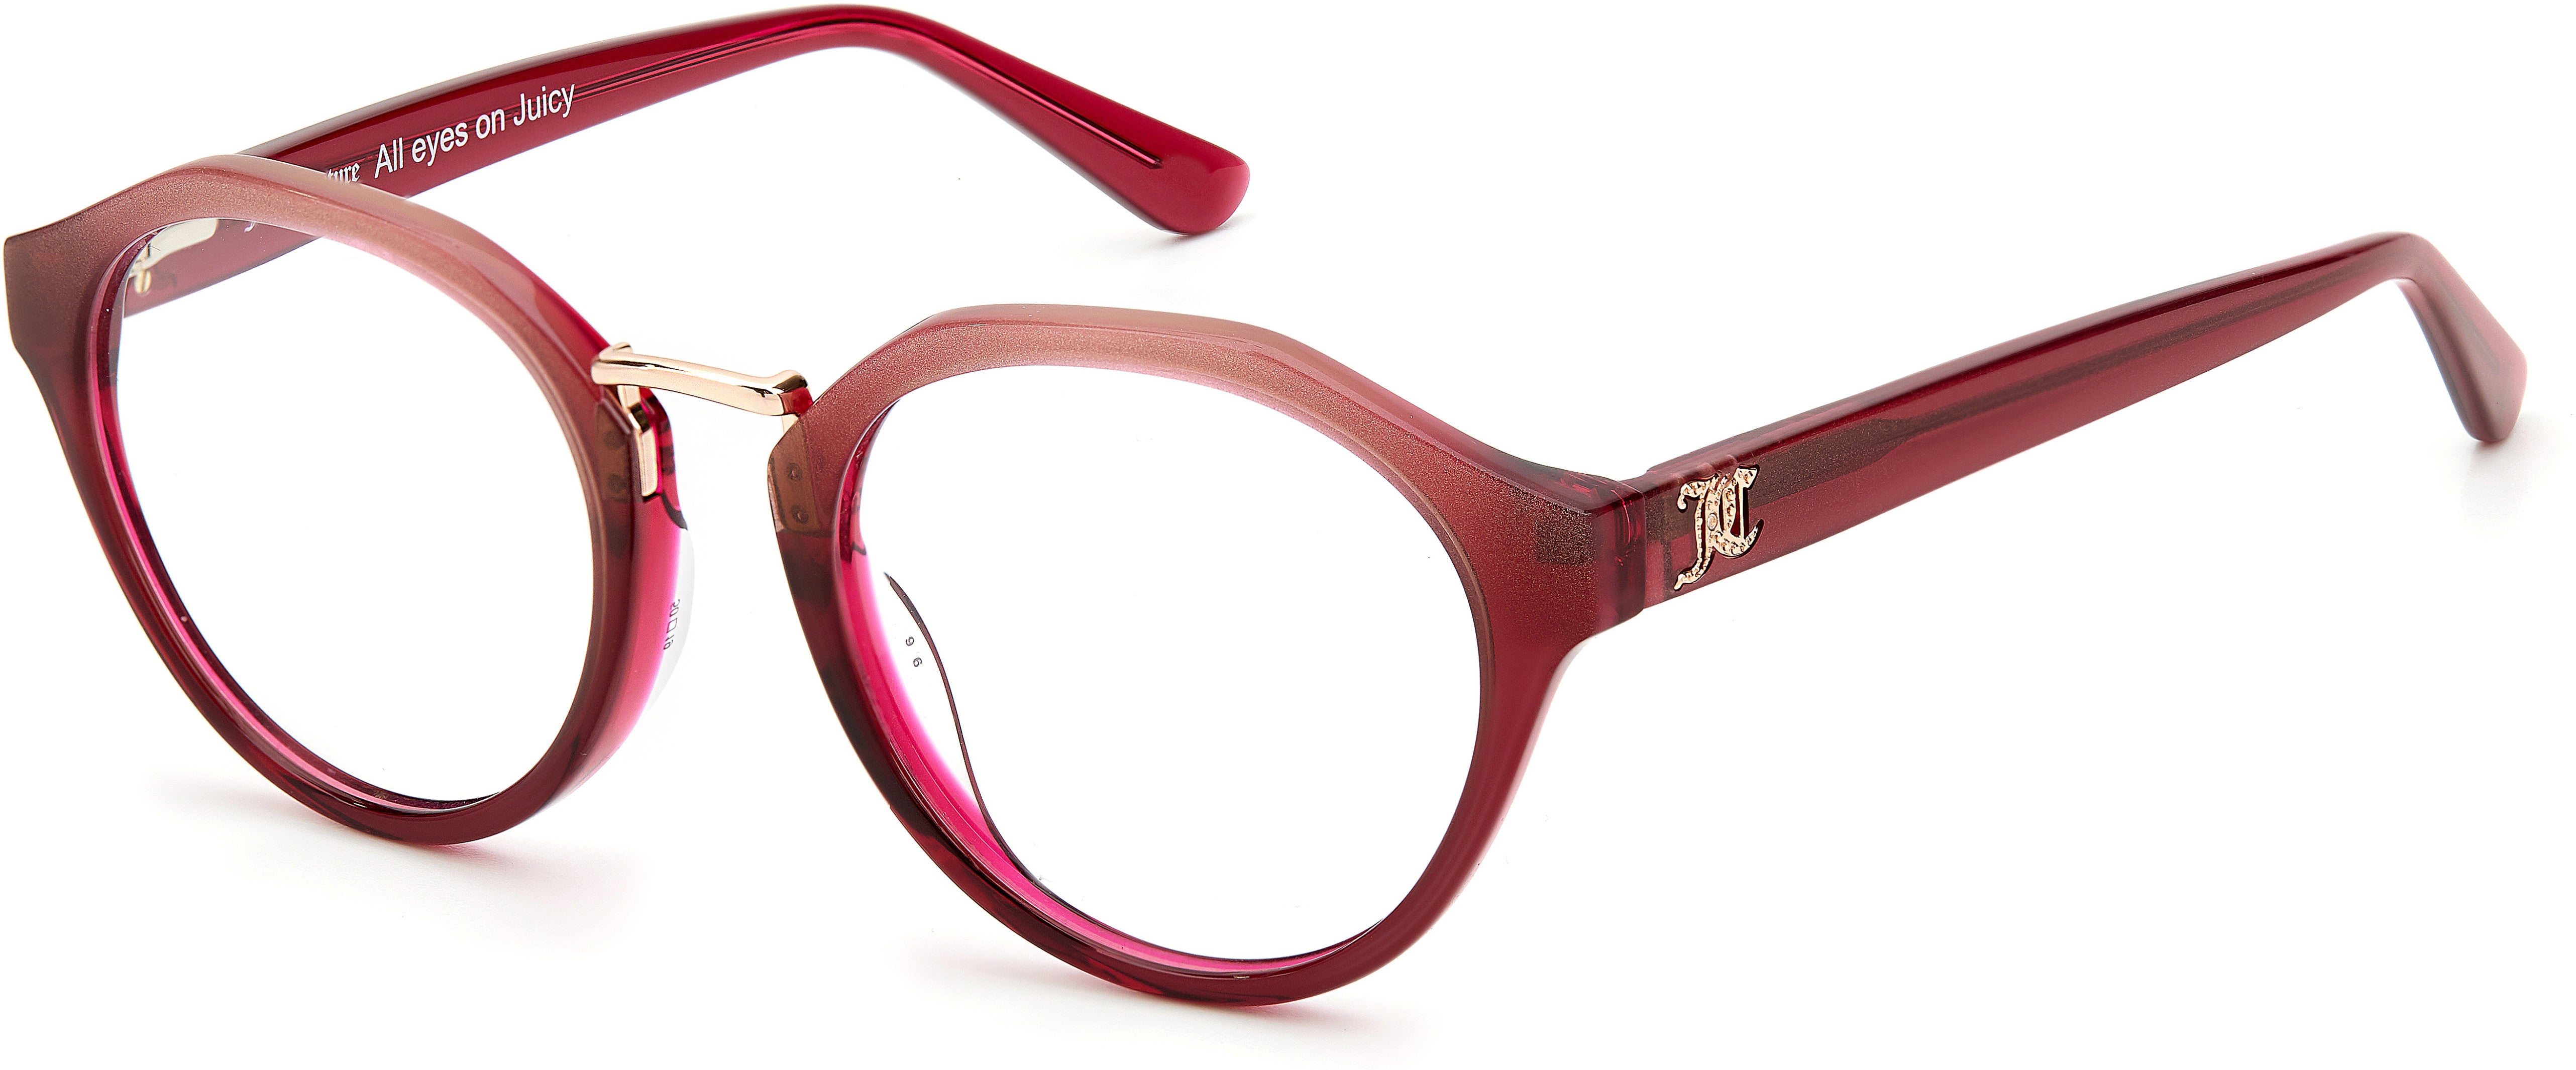 Juicy Couture Juicy 209 Oval Modified Eyeglasses 0W66-0W66  Pink Glitter (00 Demo Lens)